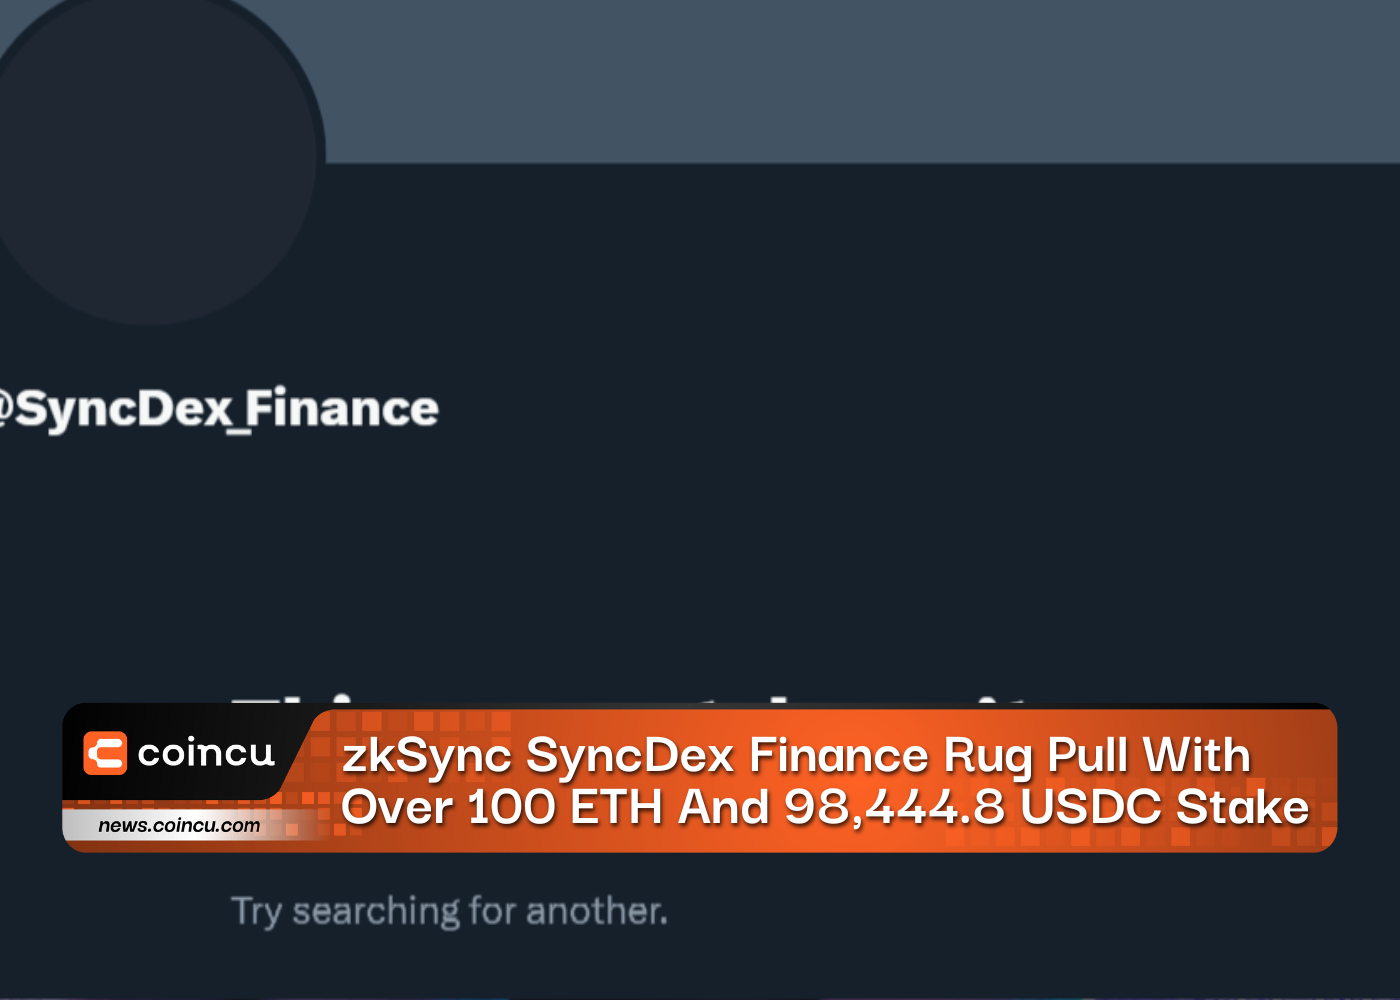 zkSync SyncDex Finance Rug Pull With Over 100 ETH And 98,444.8 USDC Stake